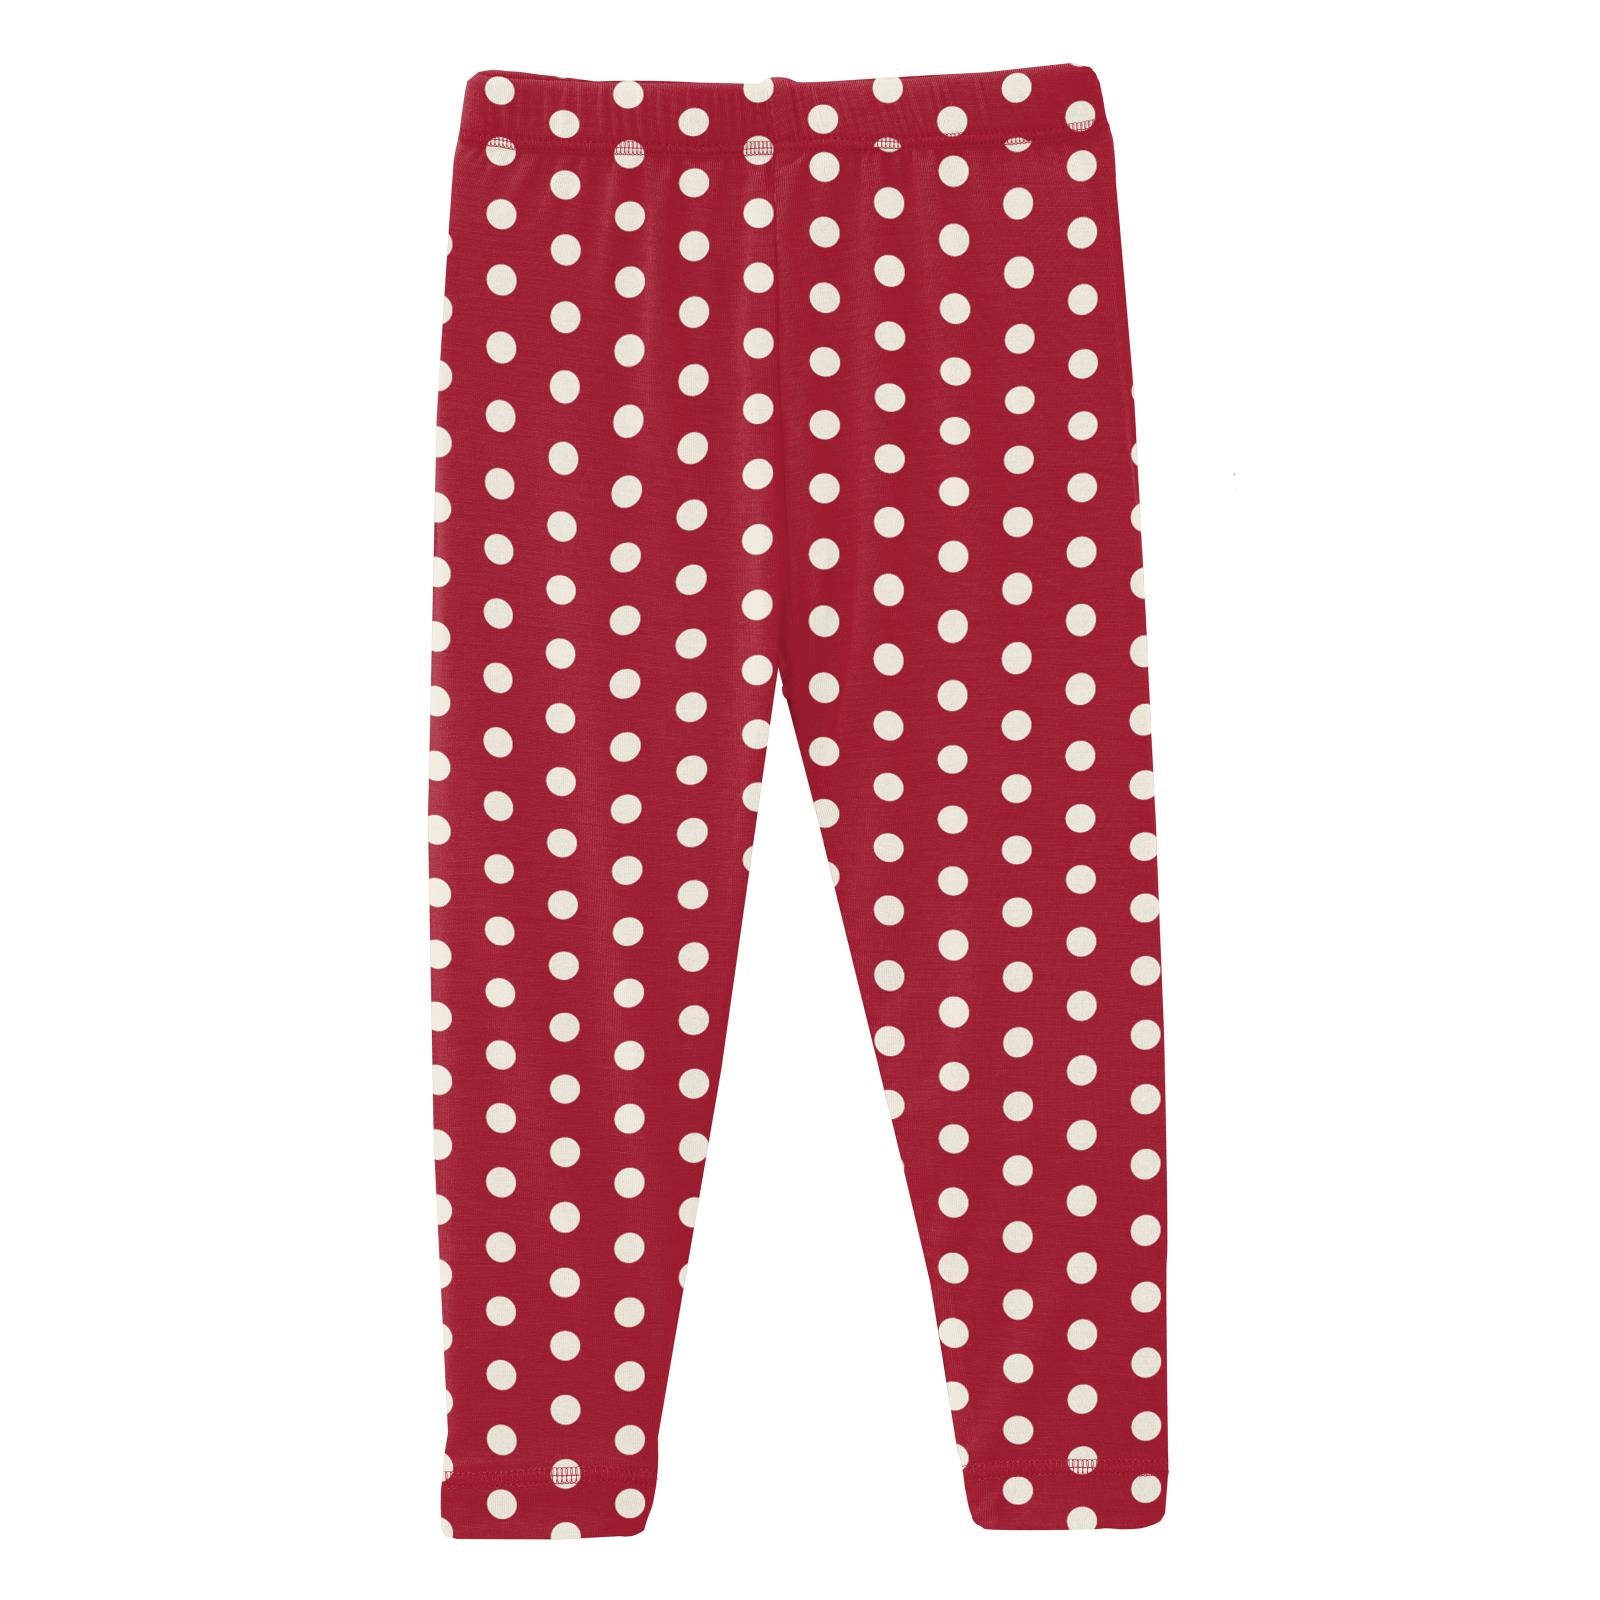 Candy Polka Dots Leggings, Gym, Fitness & Sports Clothing